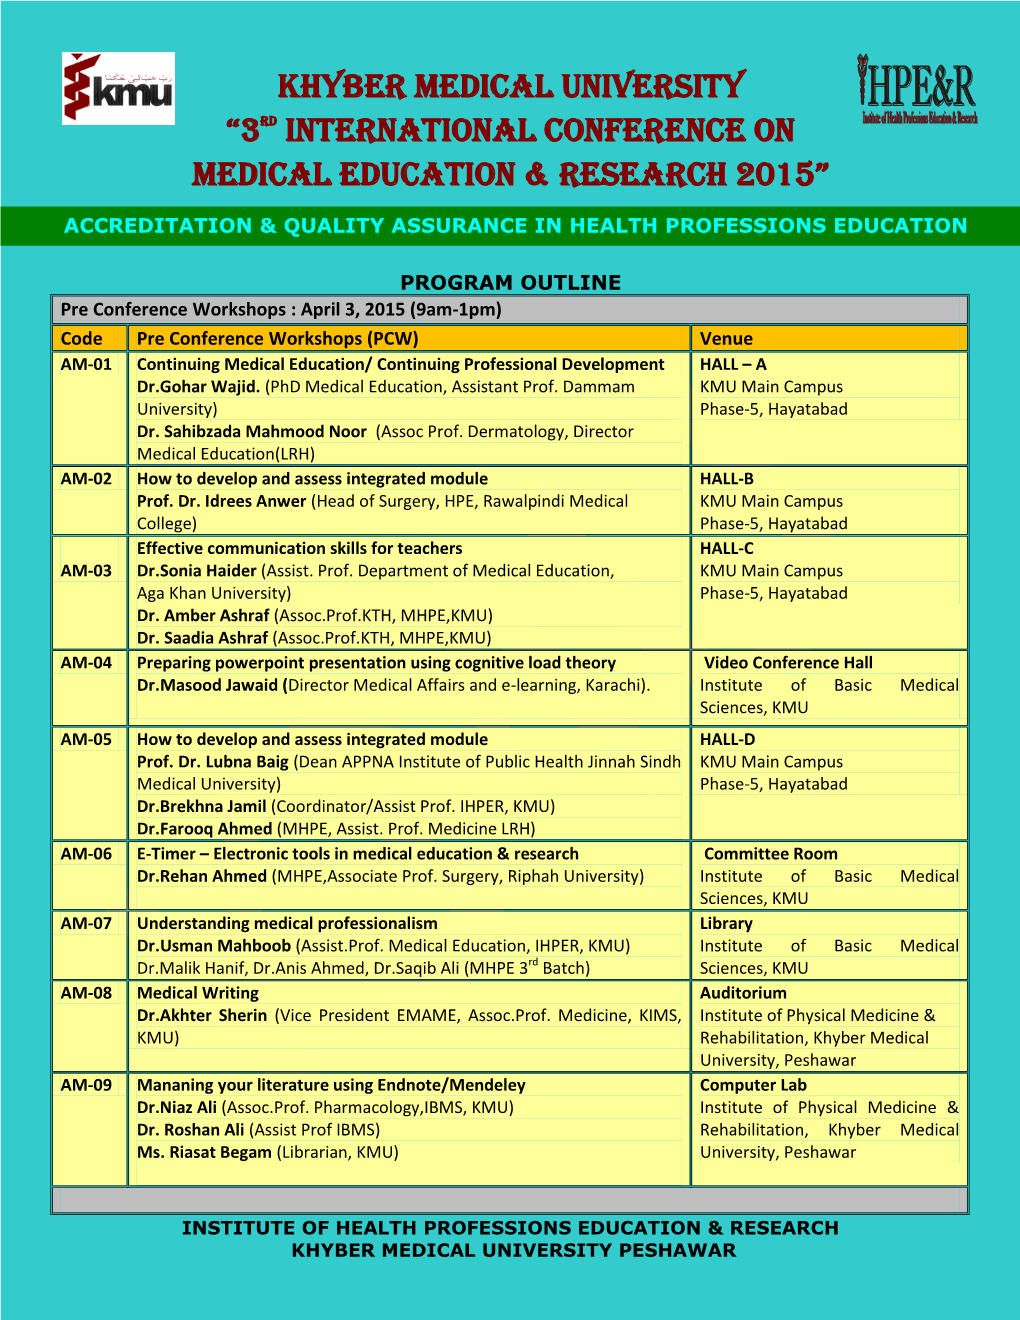 Kmu-Annual Health Research Conference 2012